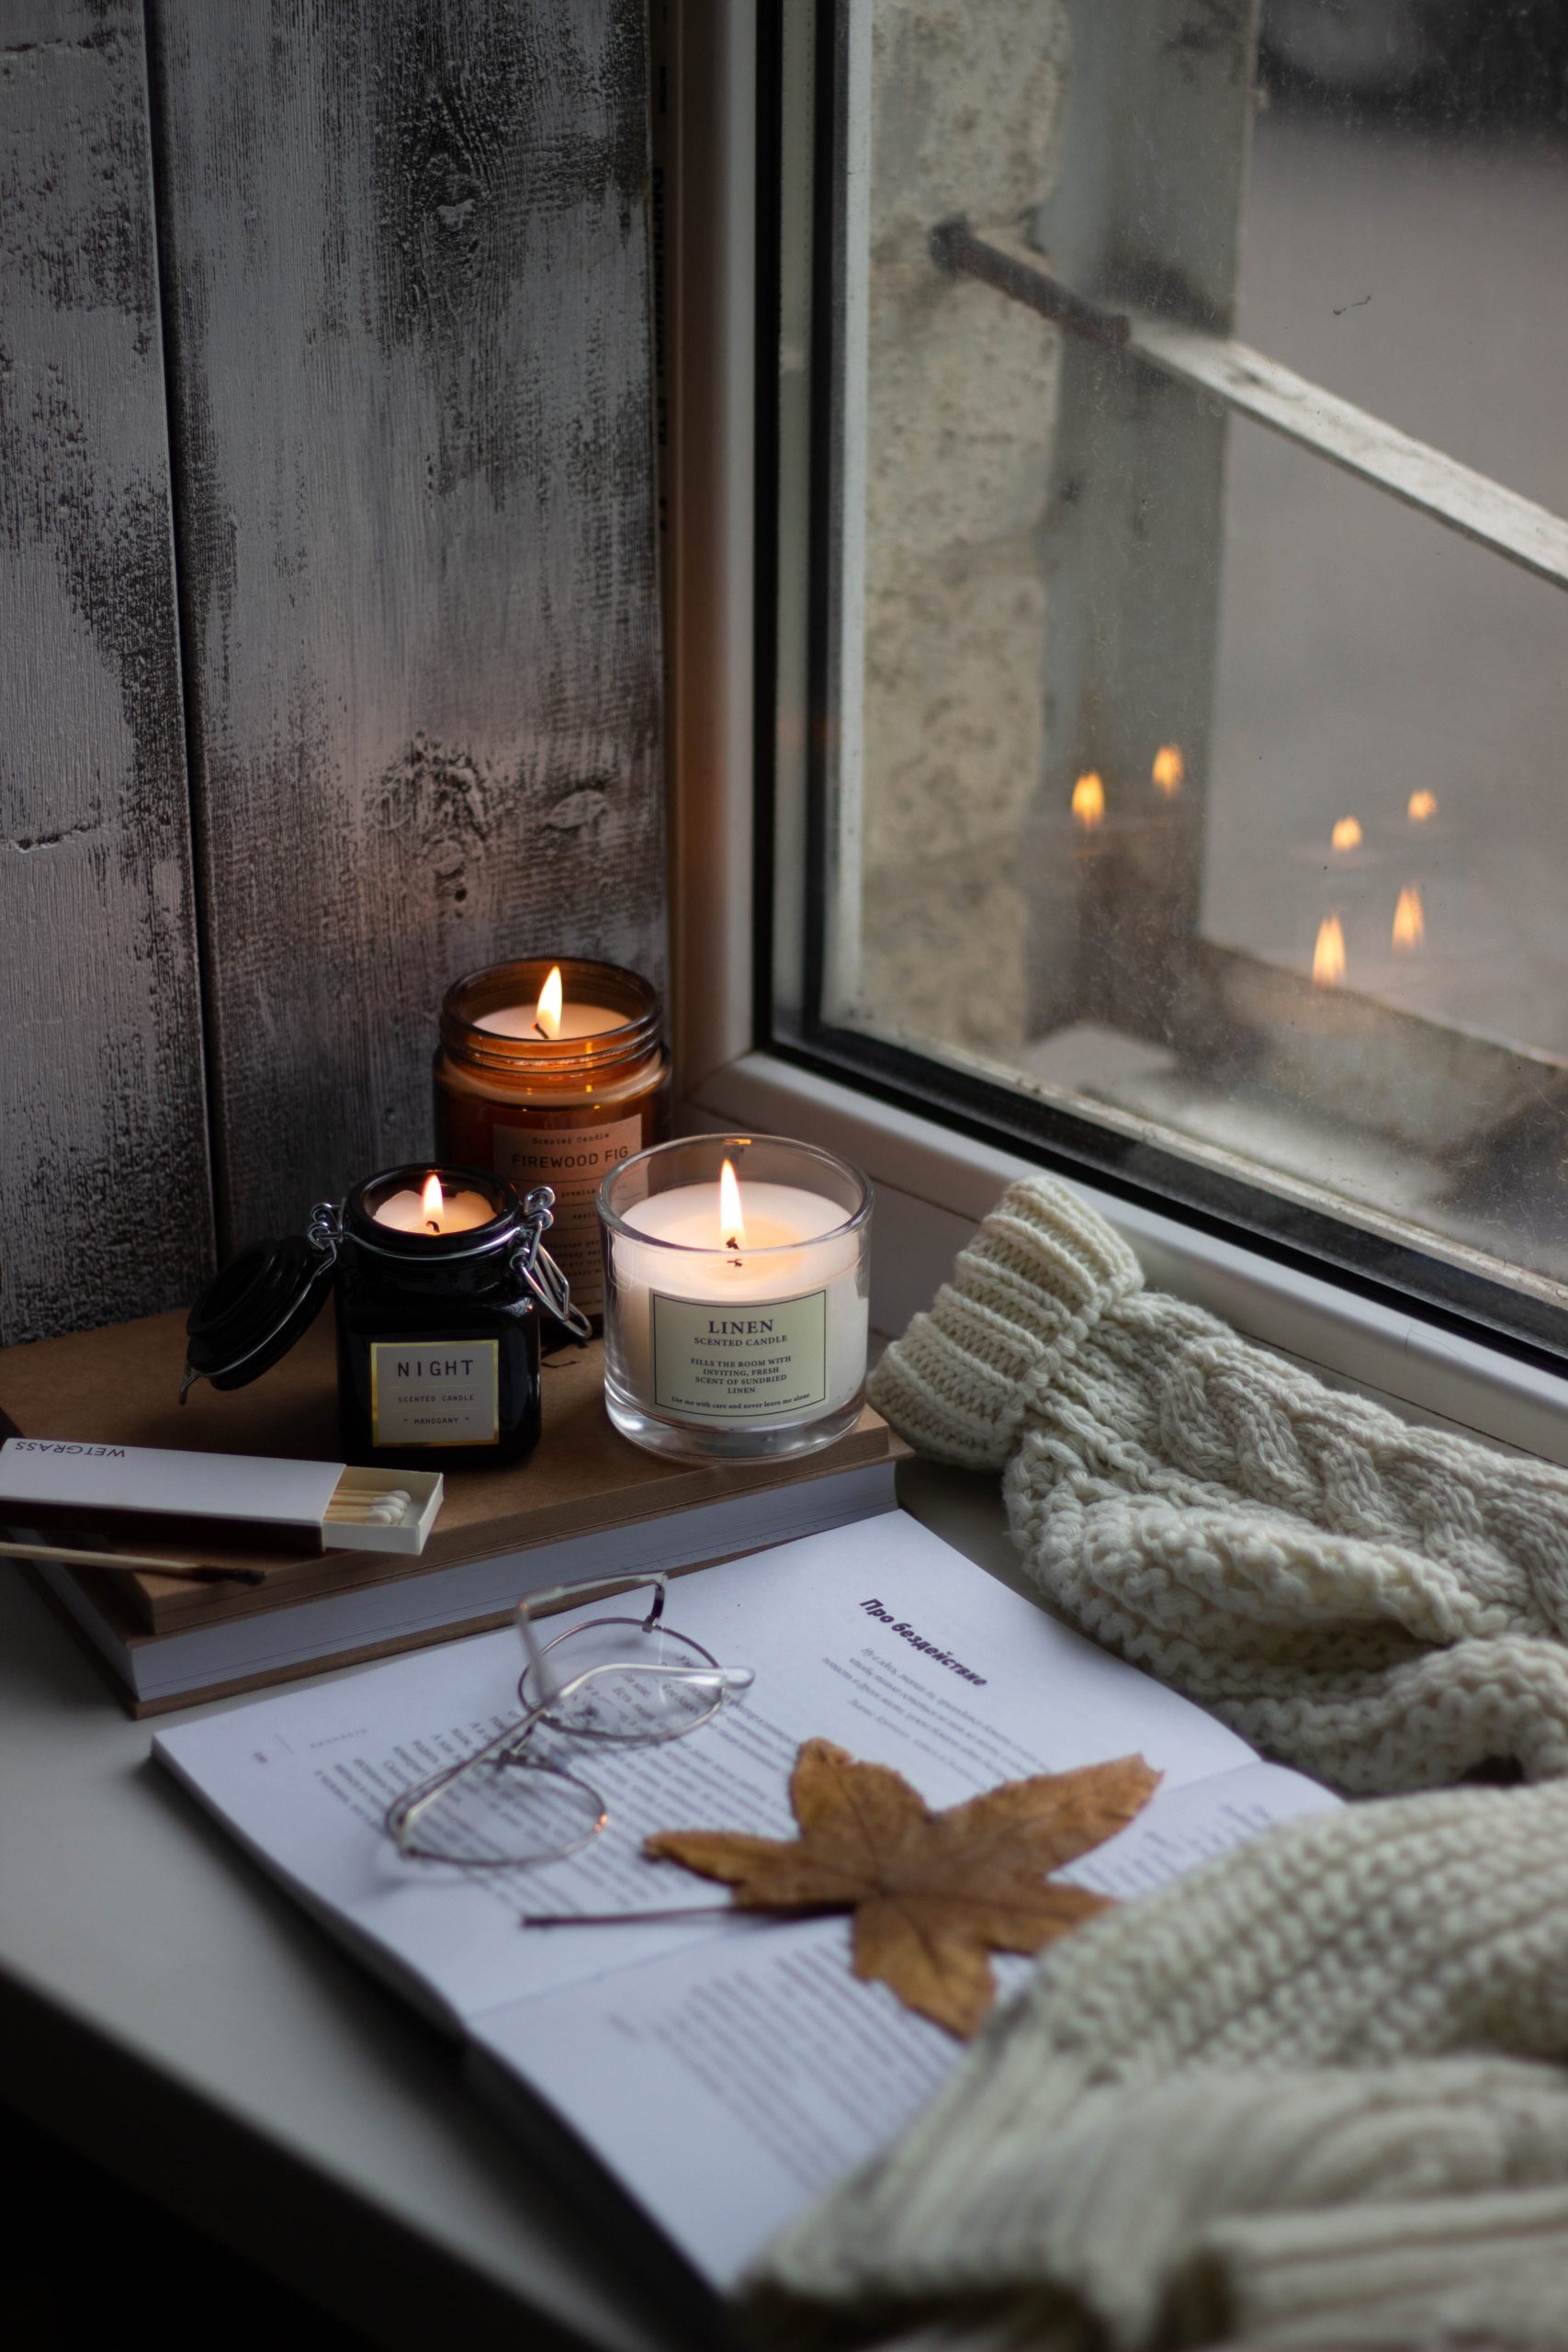 How the Scandinavian Style of “Hygge” Can Make You Love Every Minute at Home